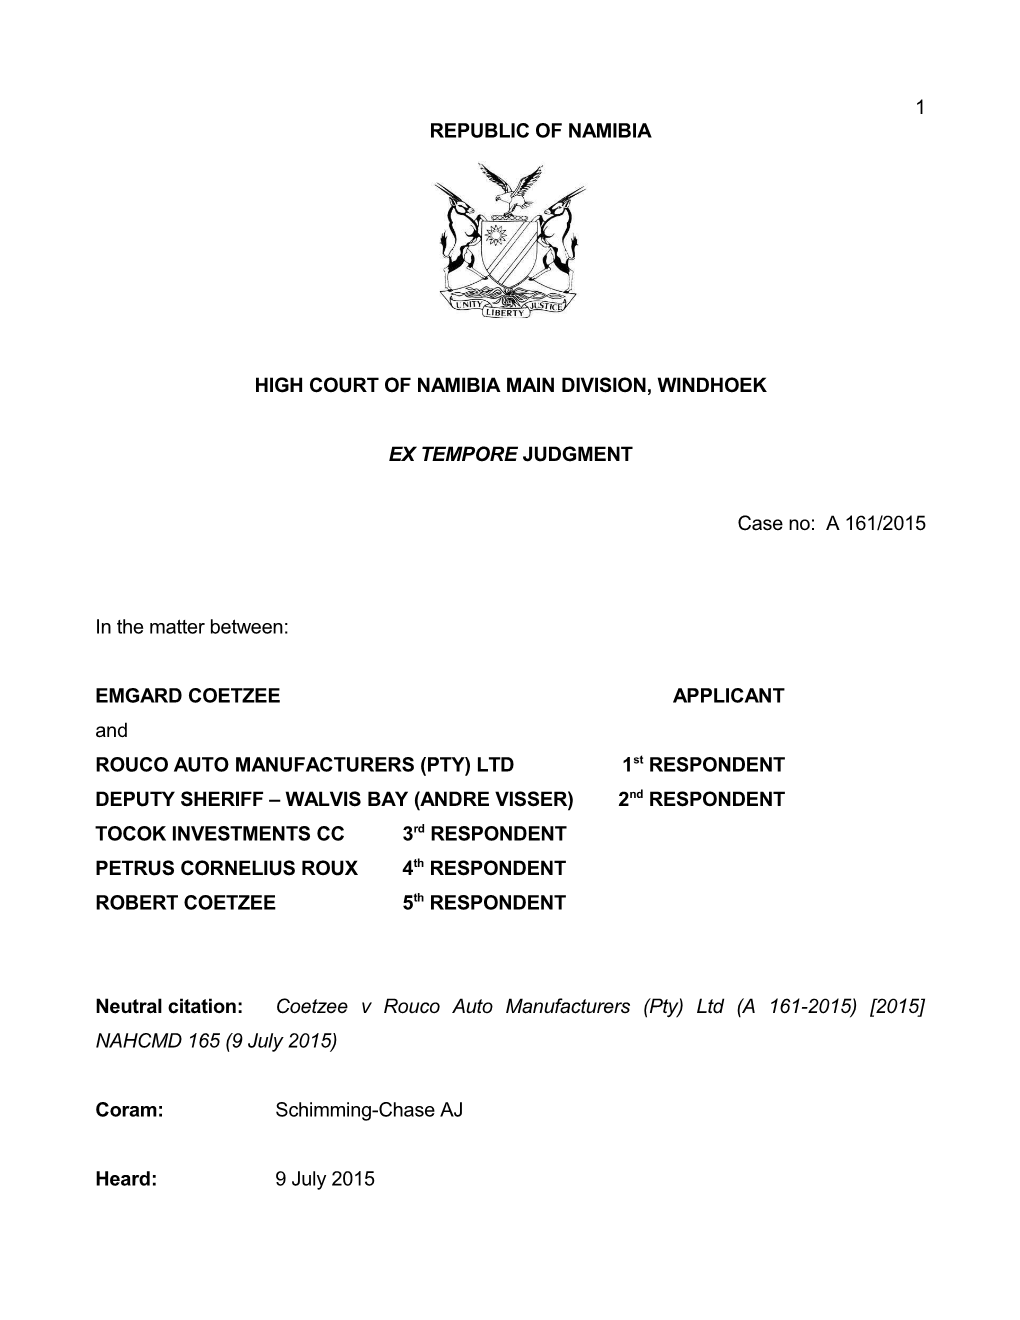 Coetzee V Rouco Auto Manufacturers (Pty) Ltd (A 161-2015) 2015 NAHCMD 165 (9 July 2015)